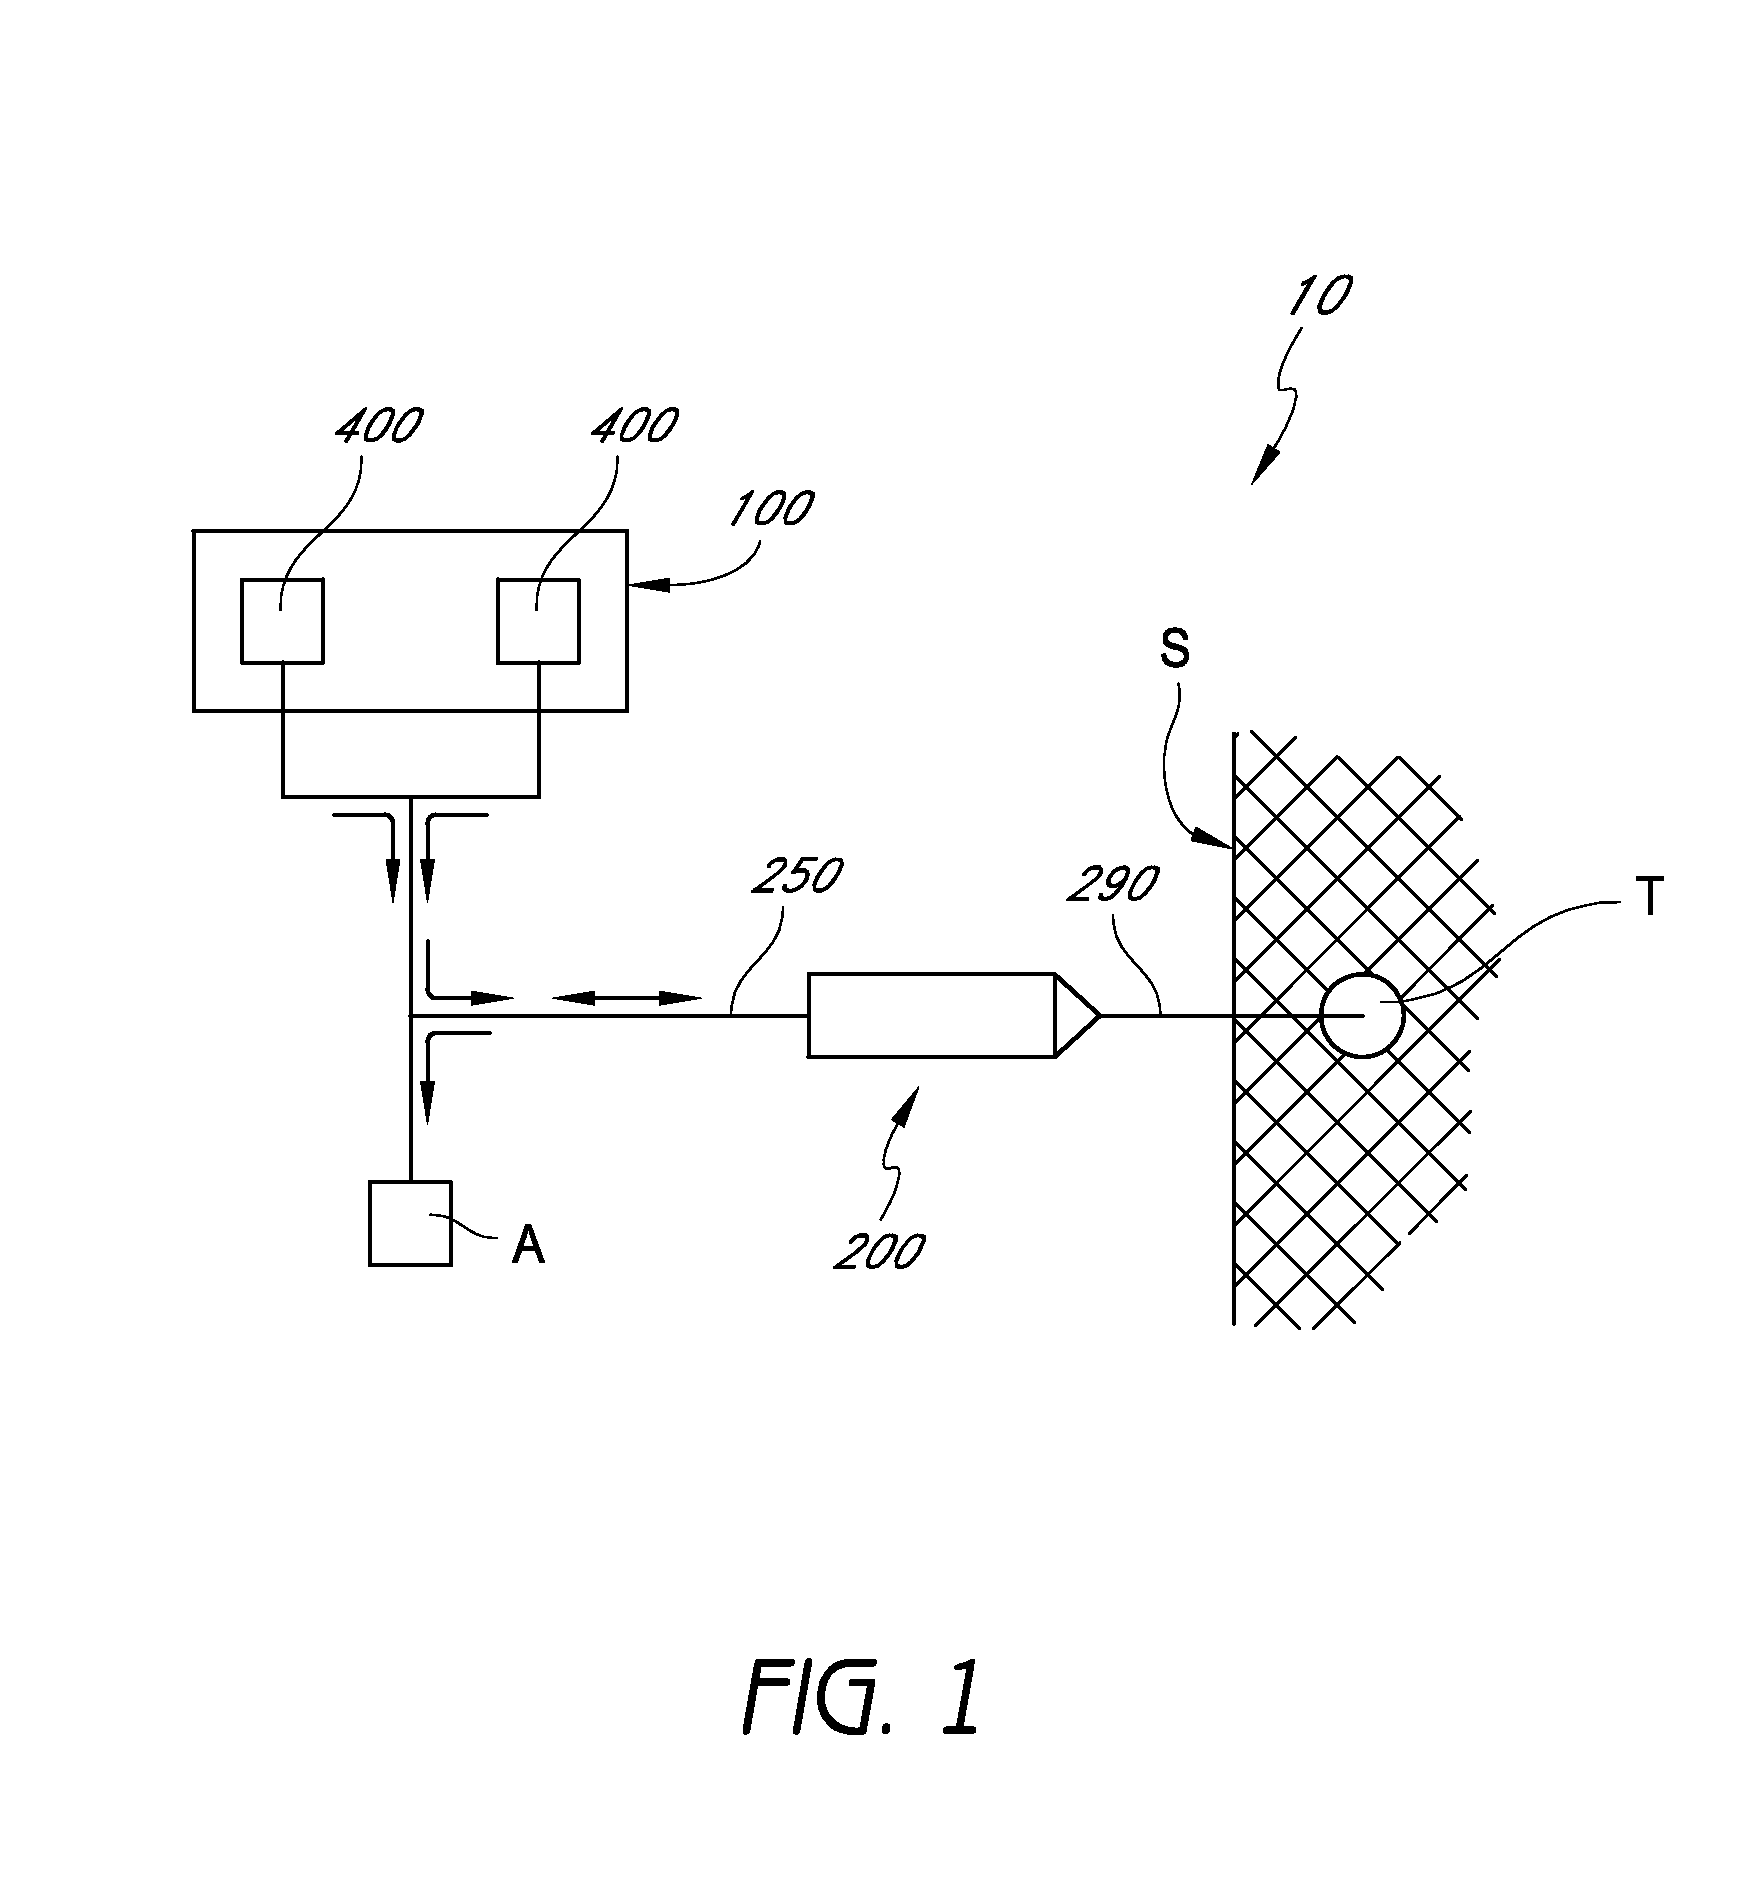 Methods of injecting fluids into joints using a handpiece assembly